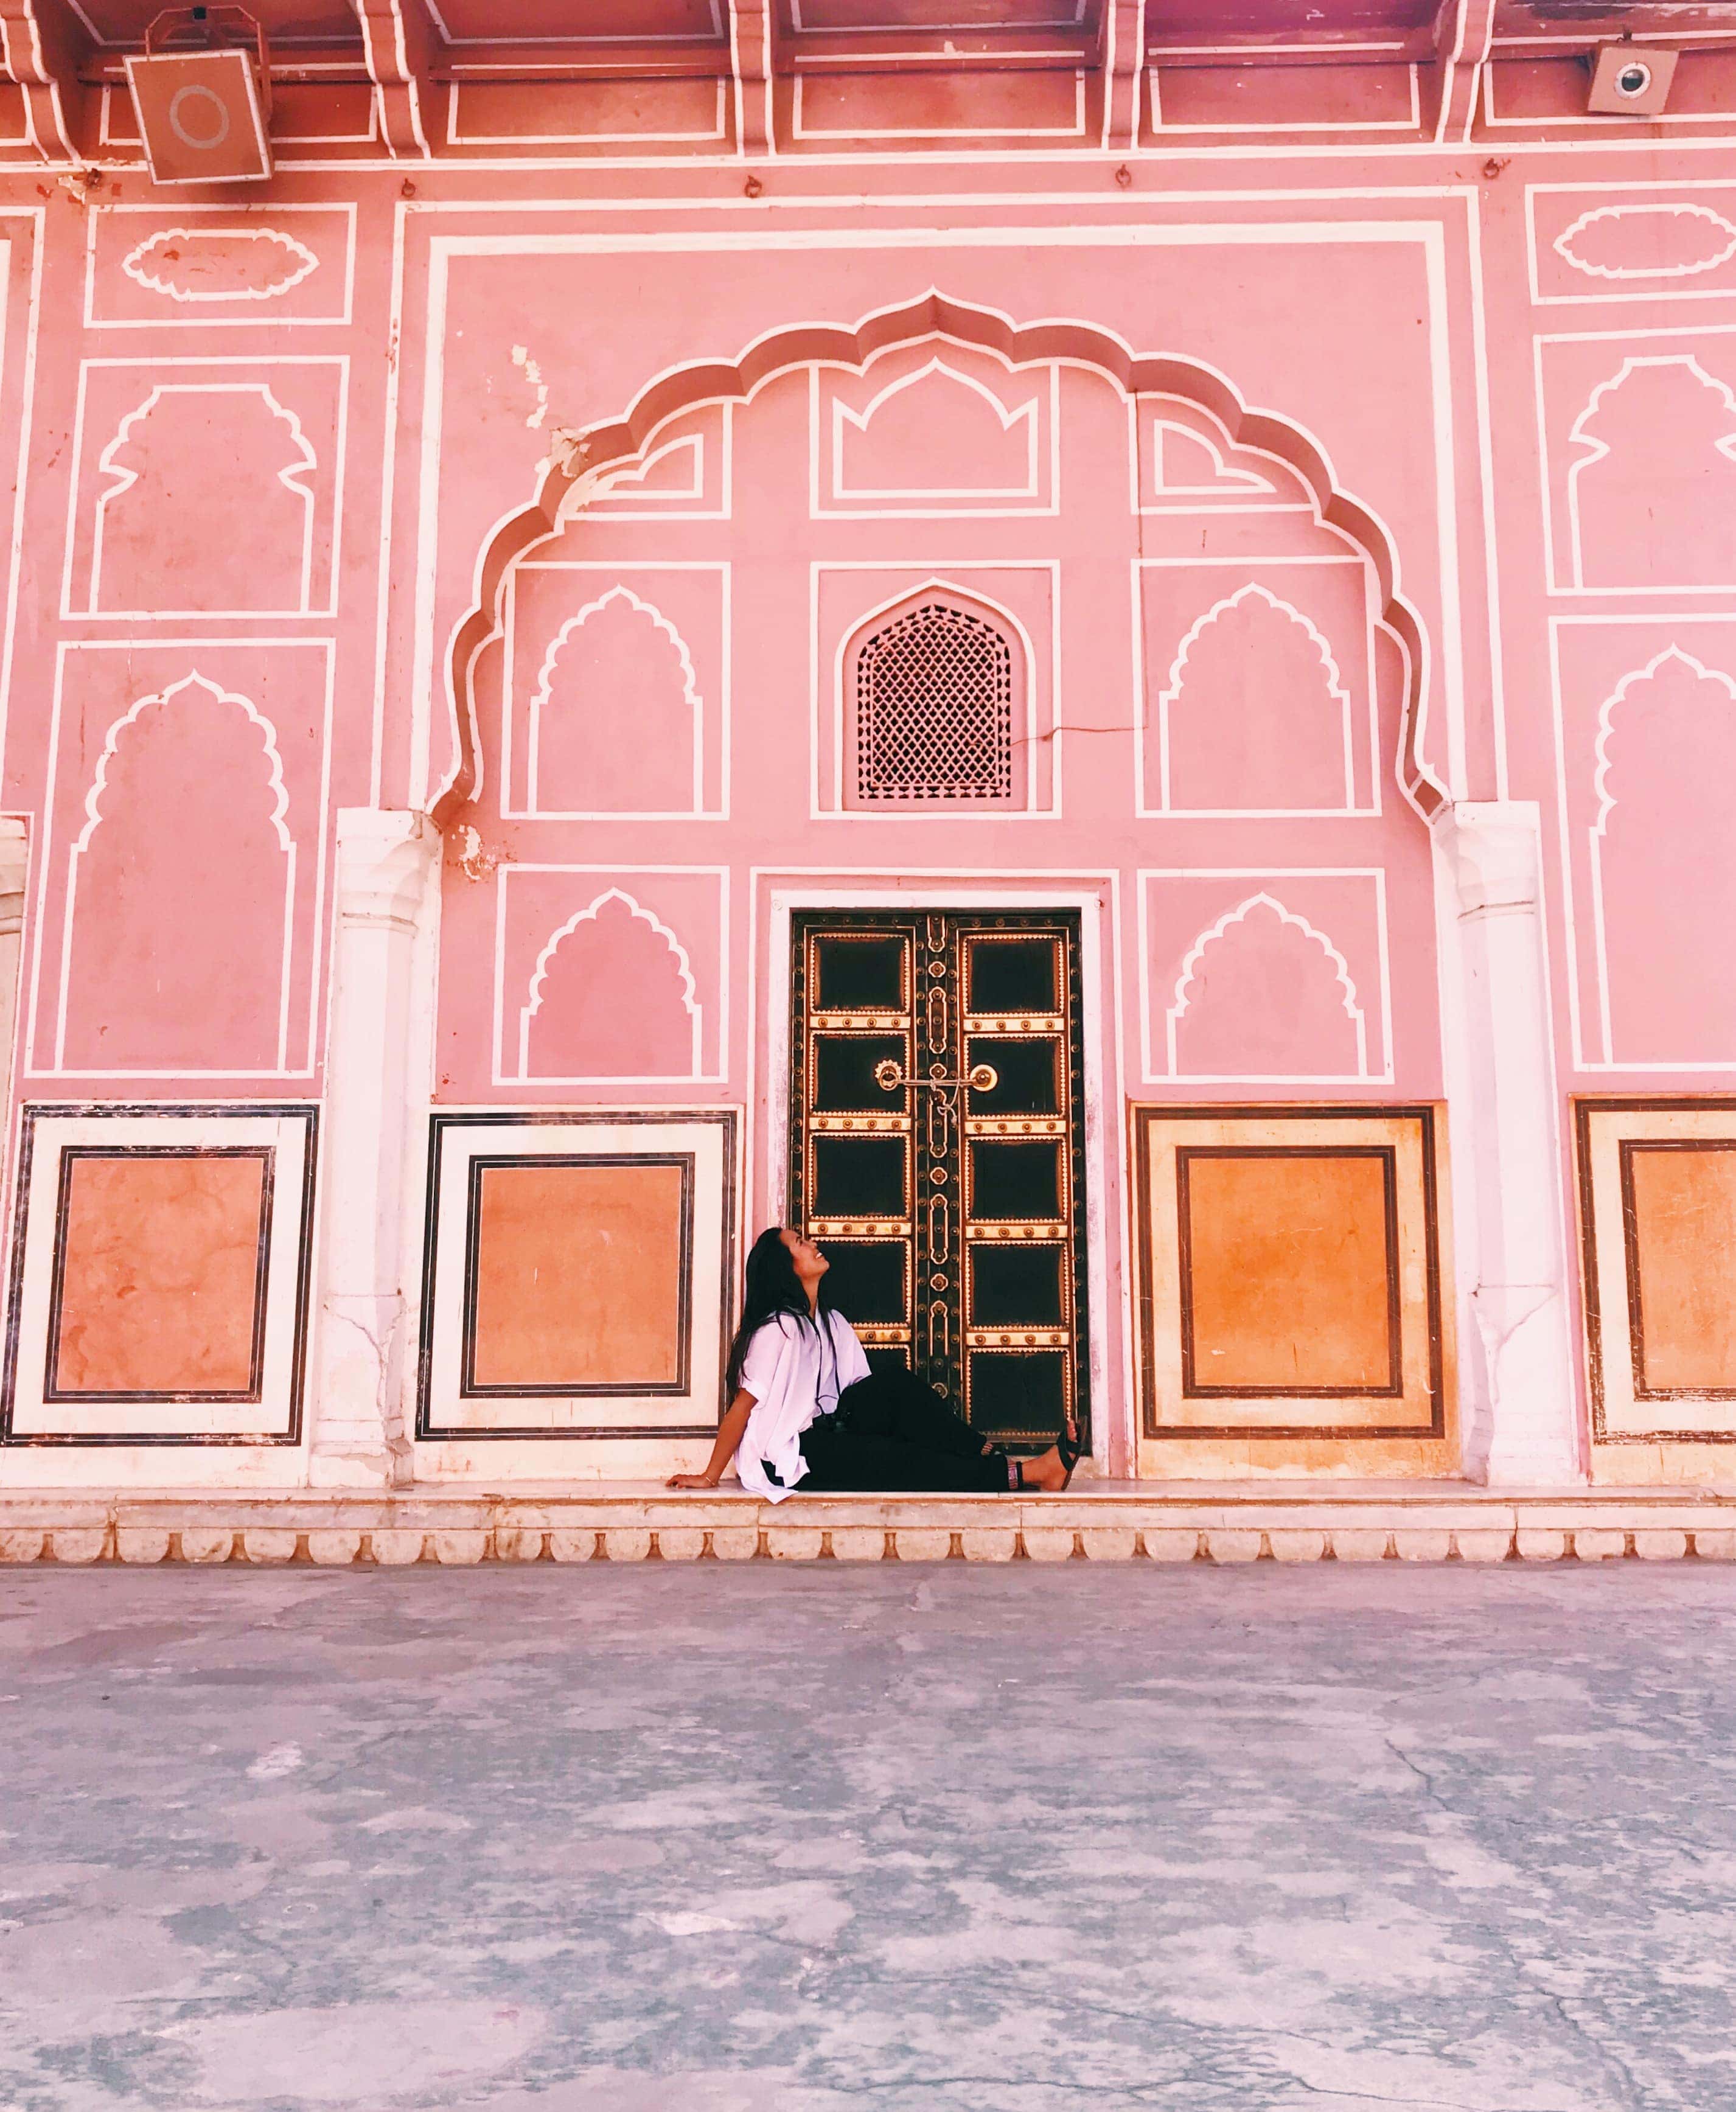 7 Instagrammable Spots In The Pink City Of Jaipur, India